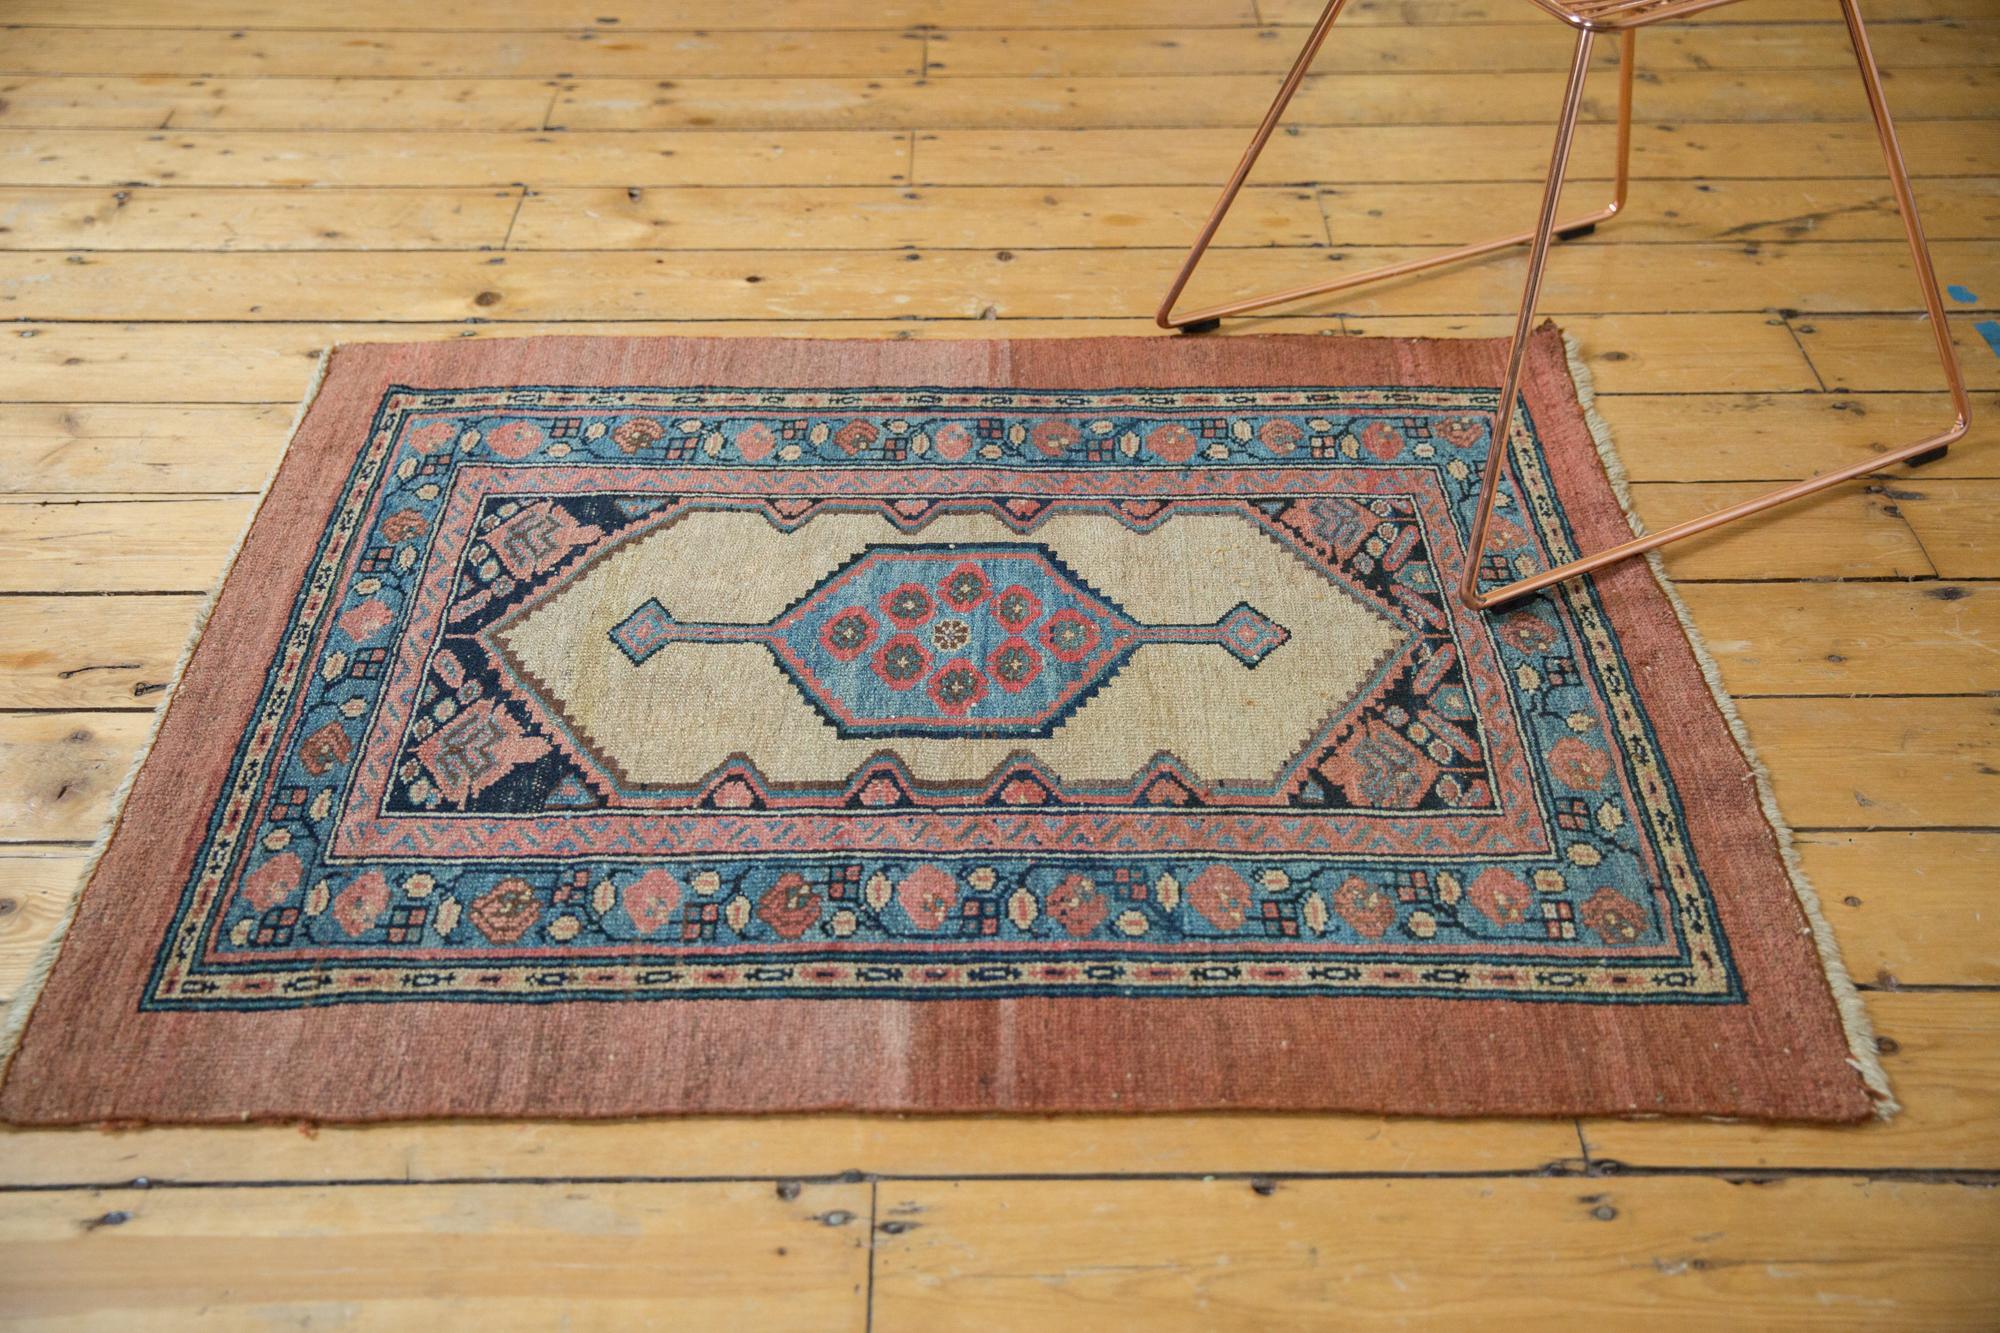 Wool Antique Camel Hair Serab Square Rug For Sale